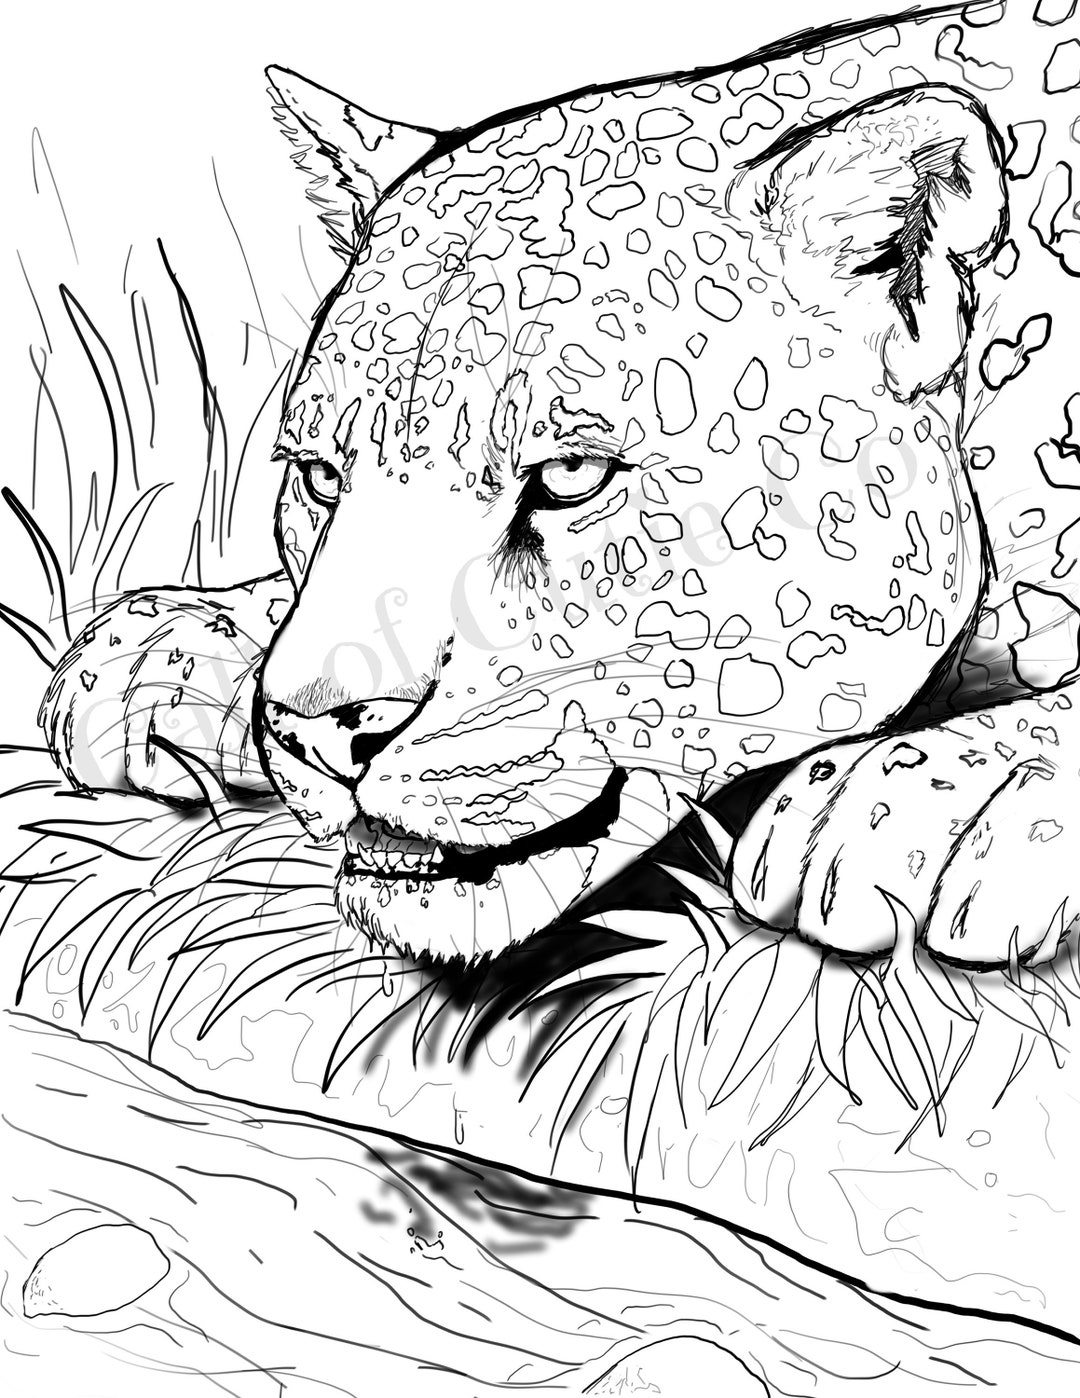 Jaguar Coloring Page, Animal Coloring Page - Etsy